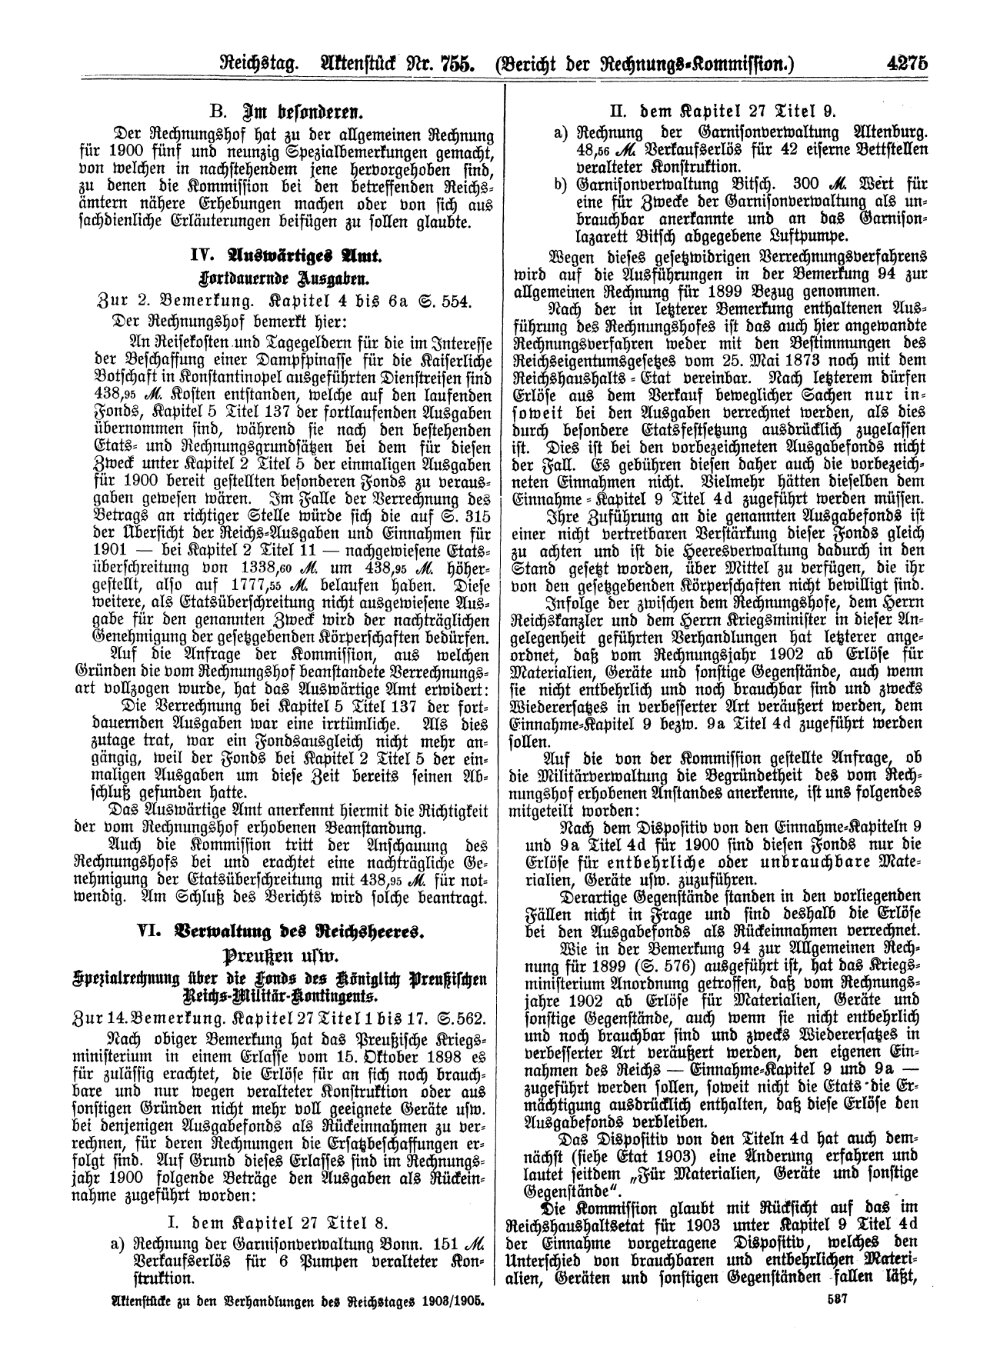 Scan of page 4275